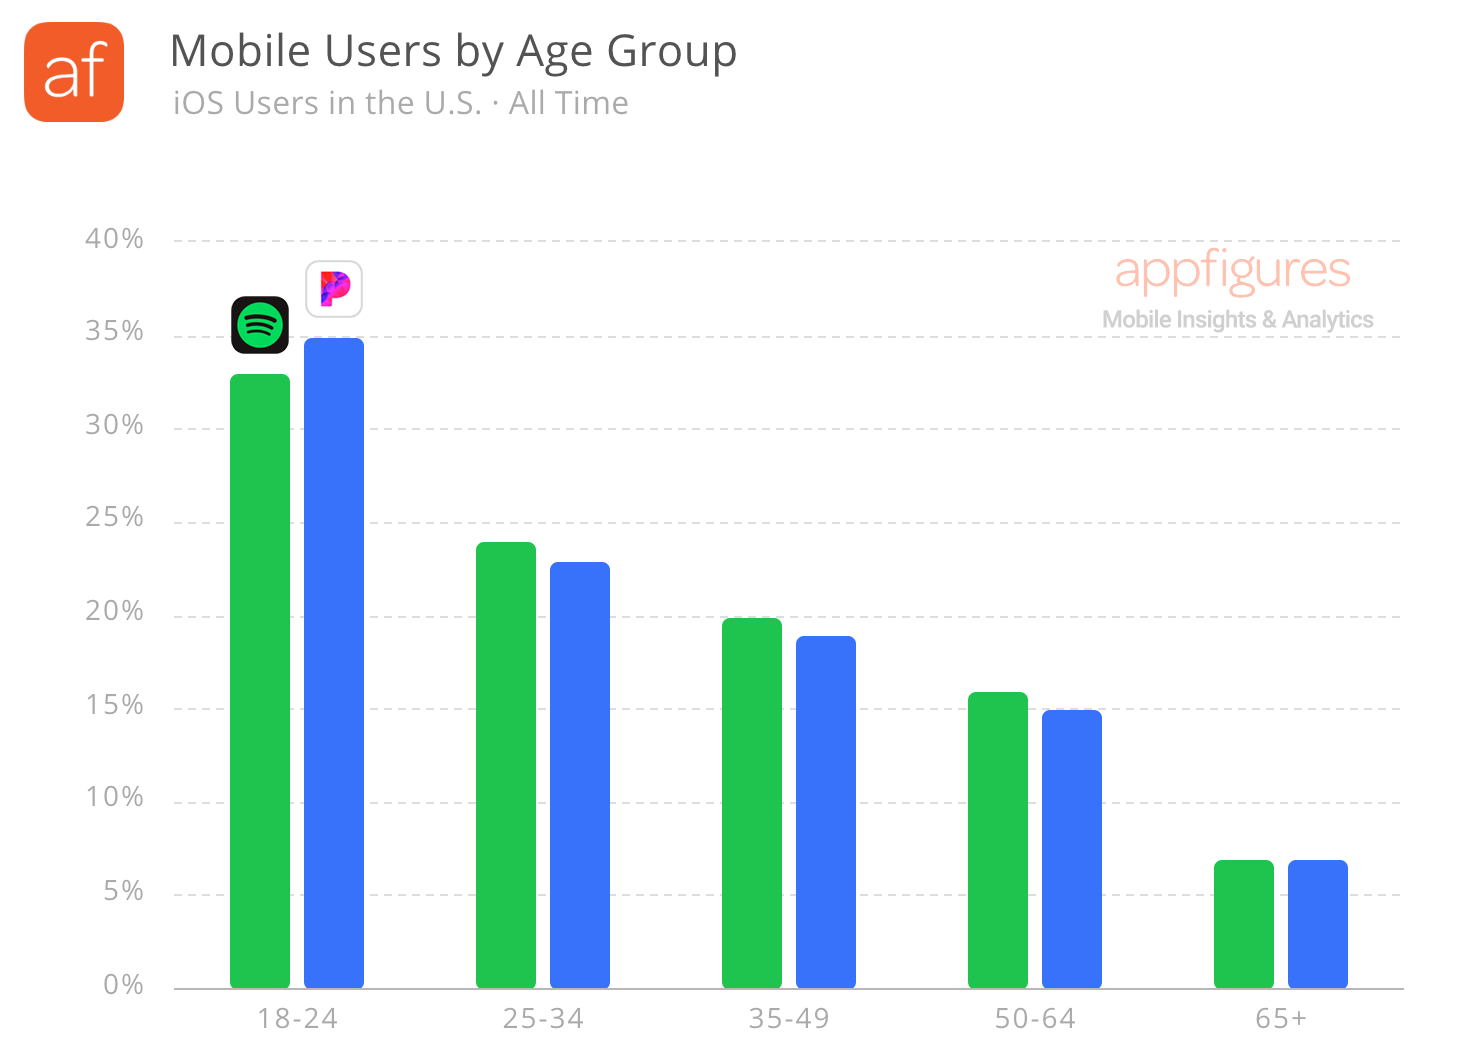 Mobile users by age for Spotify and Pandora